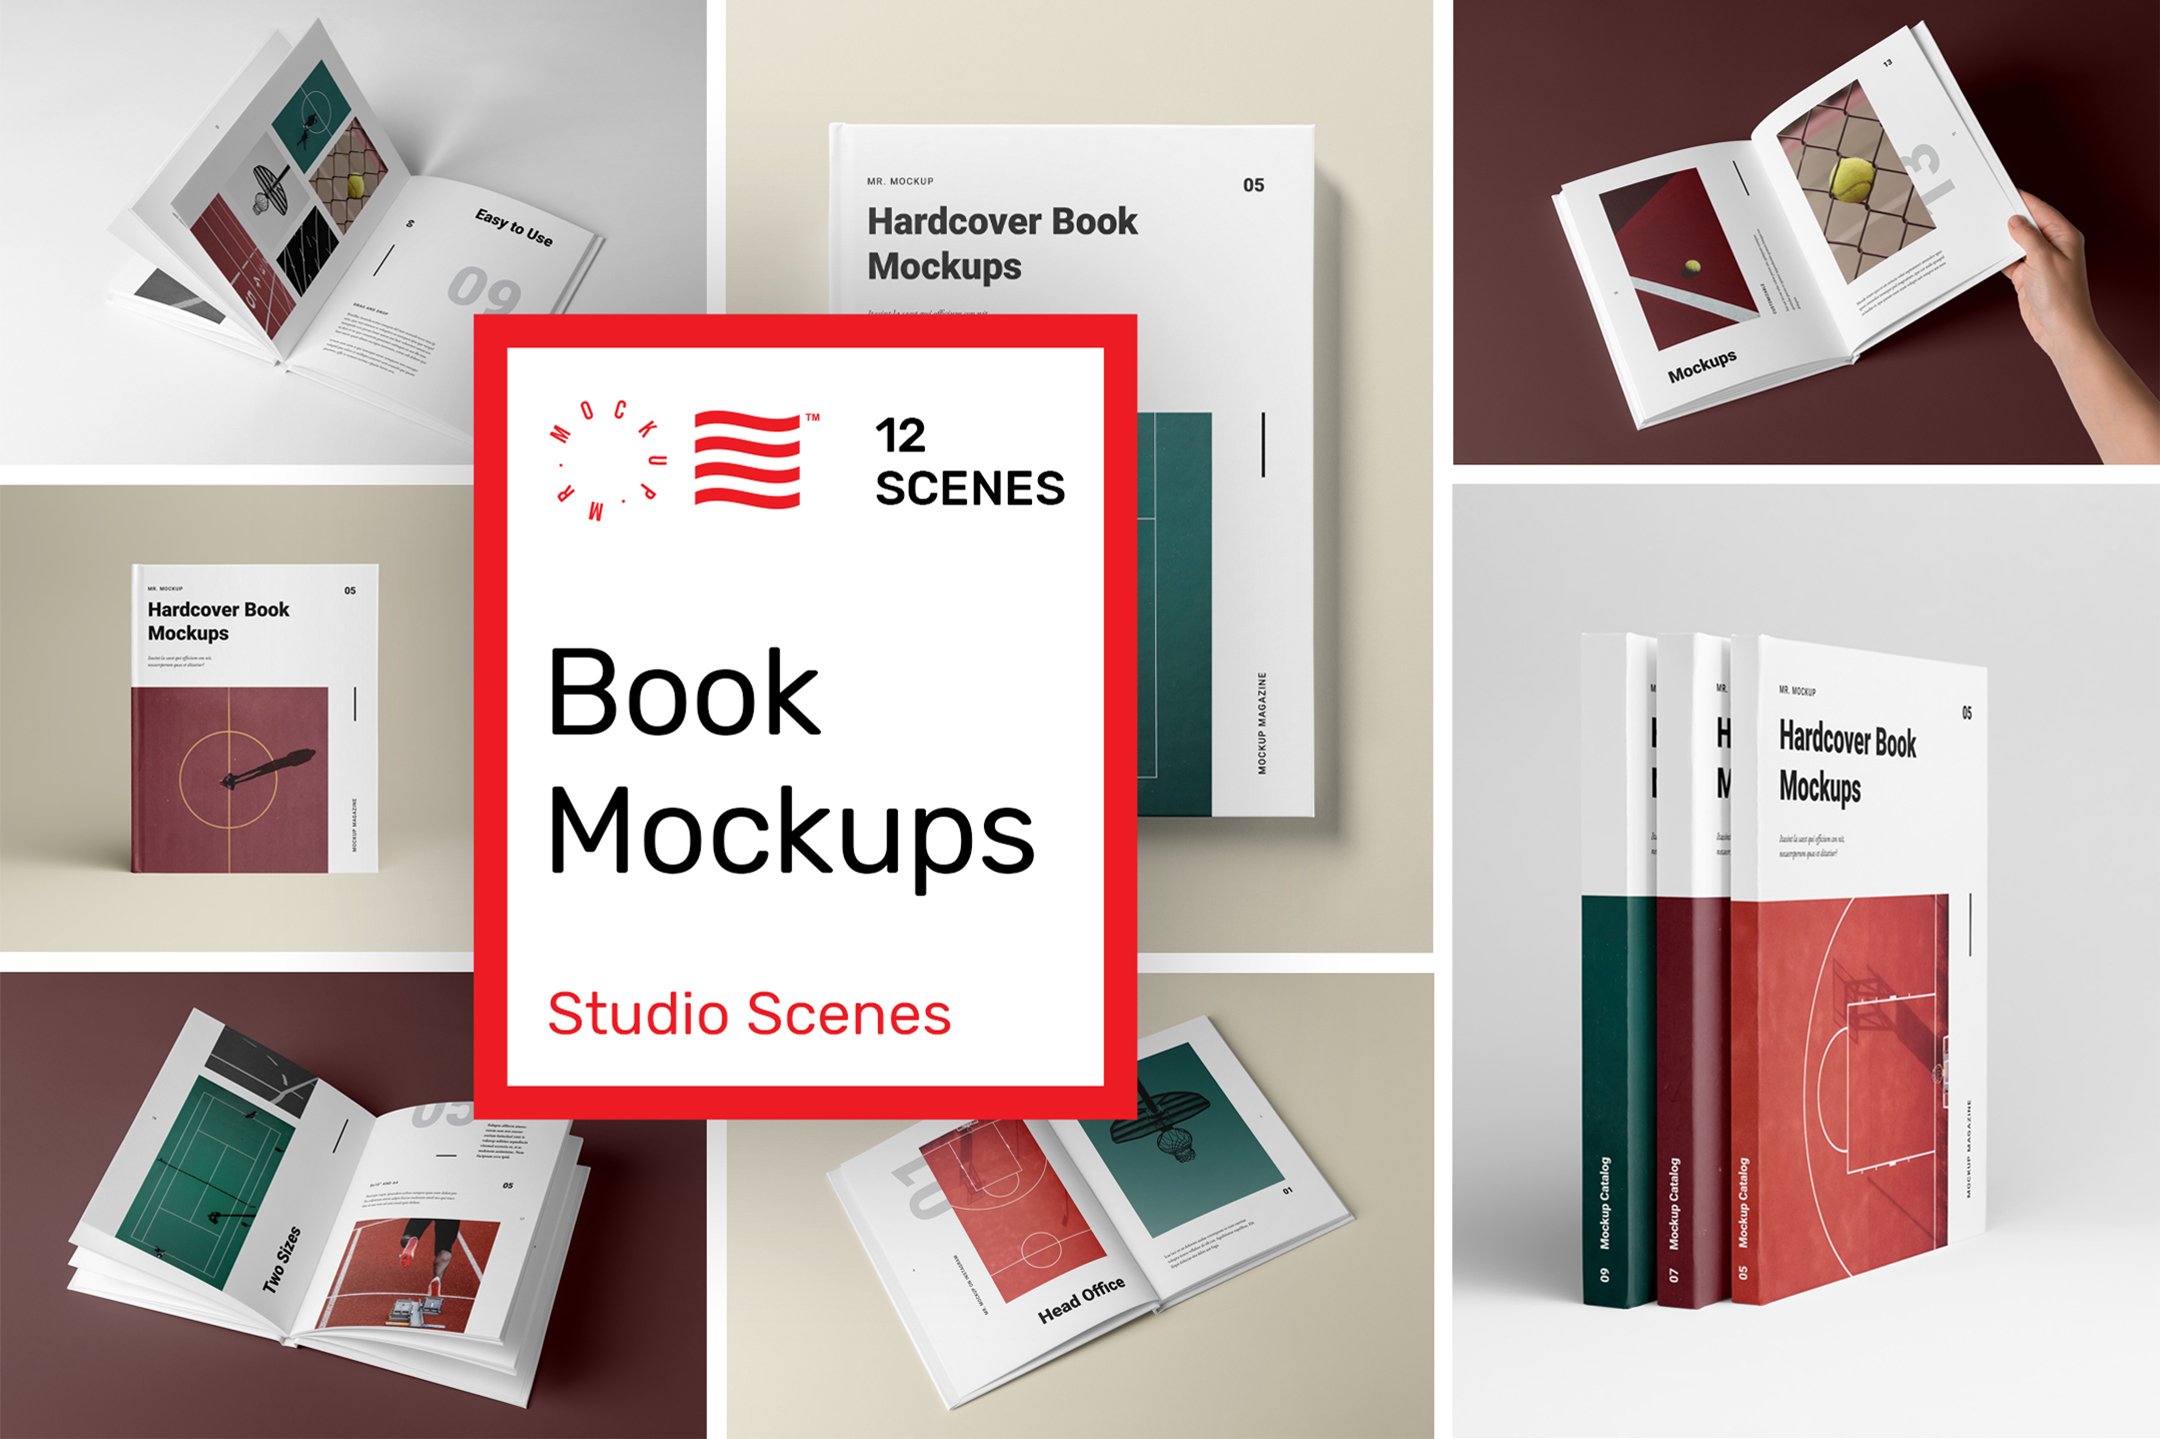 Hardcover Book Mockups cover image.